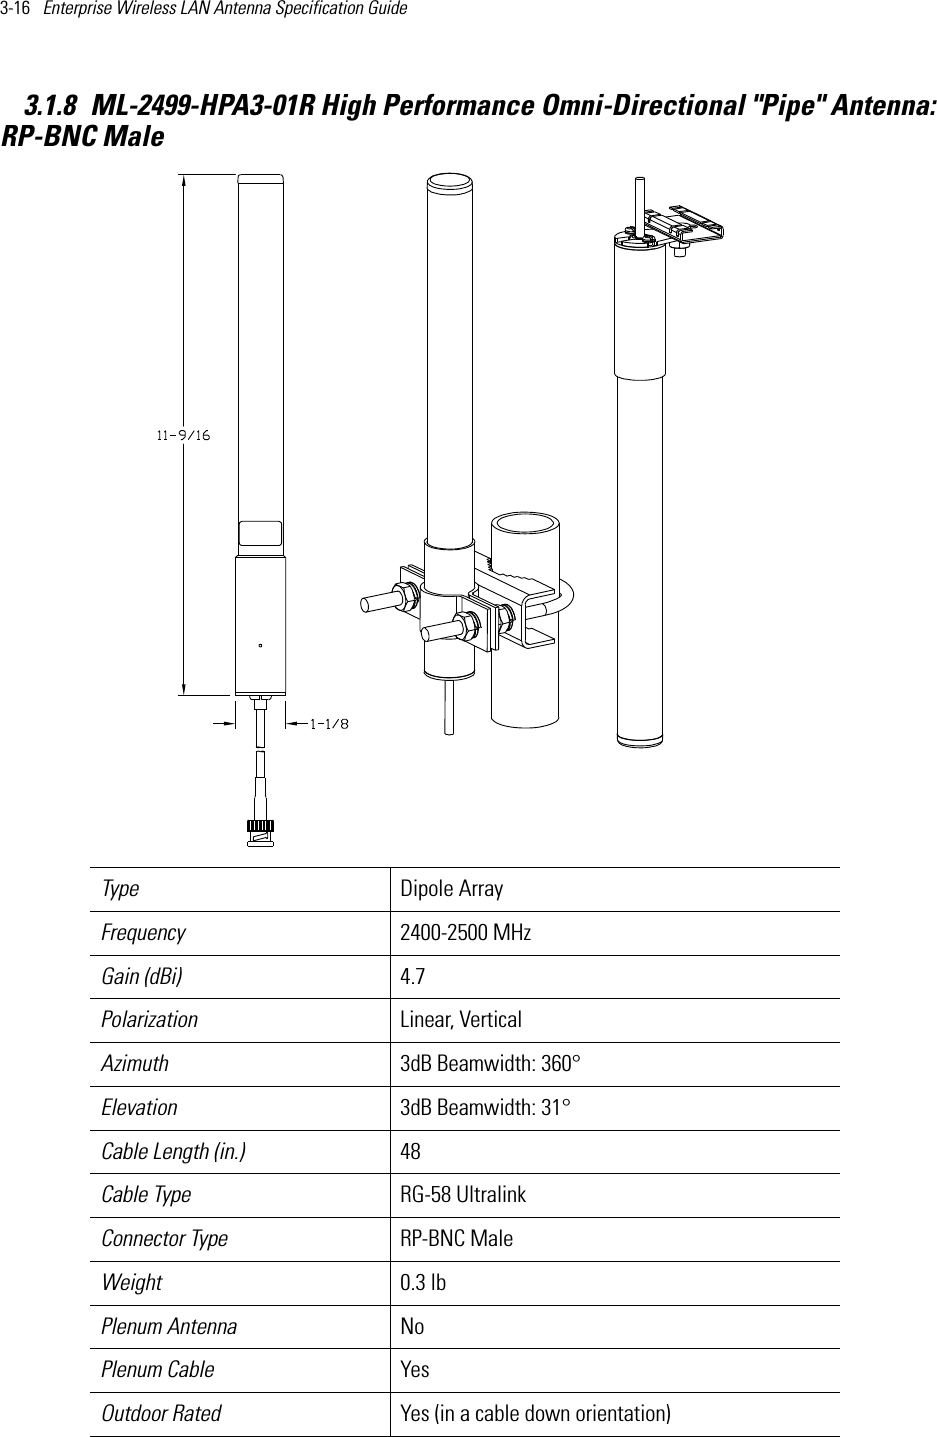 3-16   Enterprise Wireless LAN Antenna Specification Guide 3.1.8 ML-2499-HPA3-01R High Performance Omni-Directional &quot;Pipe&quot; Antenna:RP-BNC MaleType Dipole Array Frequency 2400-2500 MHzGain (dBi) 4.7Polarization Linear, VerticalAzimuth 3dB Beamwidth: 360°Elevation 3dB Beamwidth: 31°Cable Length (in.) 48Cable Type RG-58 UltralinkConnector Type RP-BNC Male Weight 0.3 lbPlenum Antenna No Plenum Cable YesOutdoor Rated Yes (in a cable down orientation)     